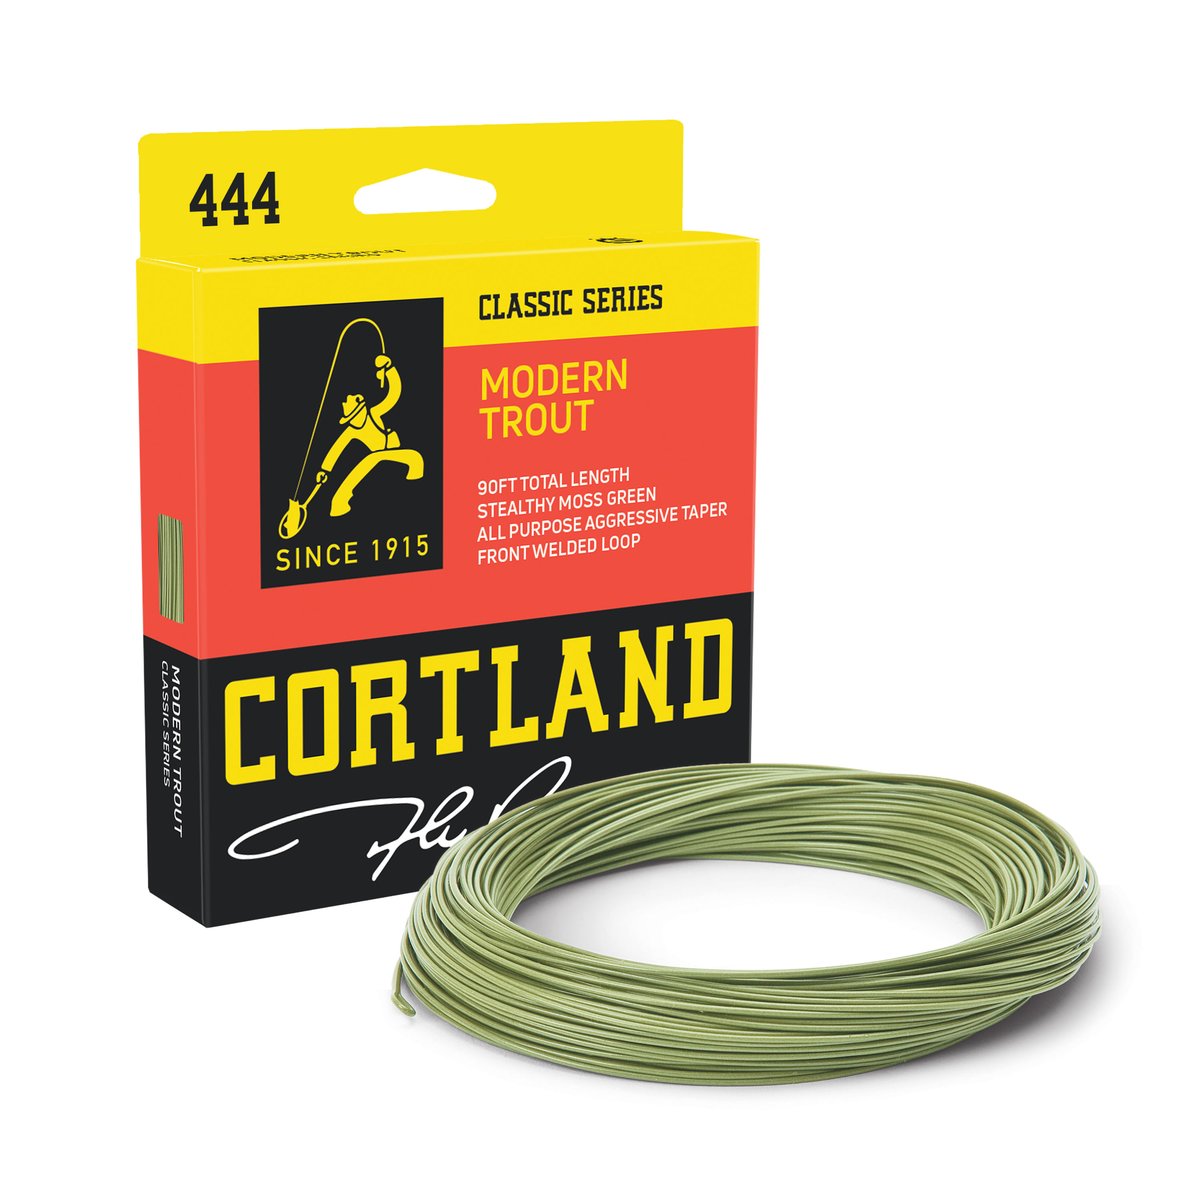 Cortland Series 444 Modern Trout Fly Line